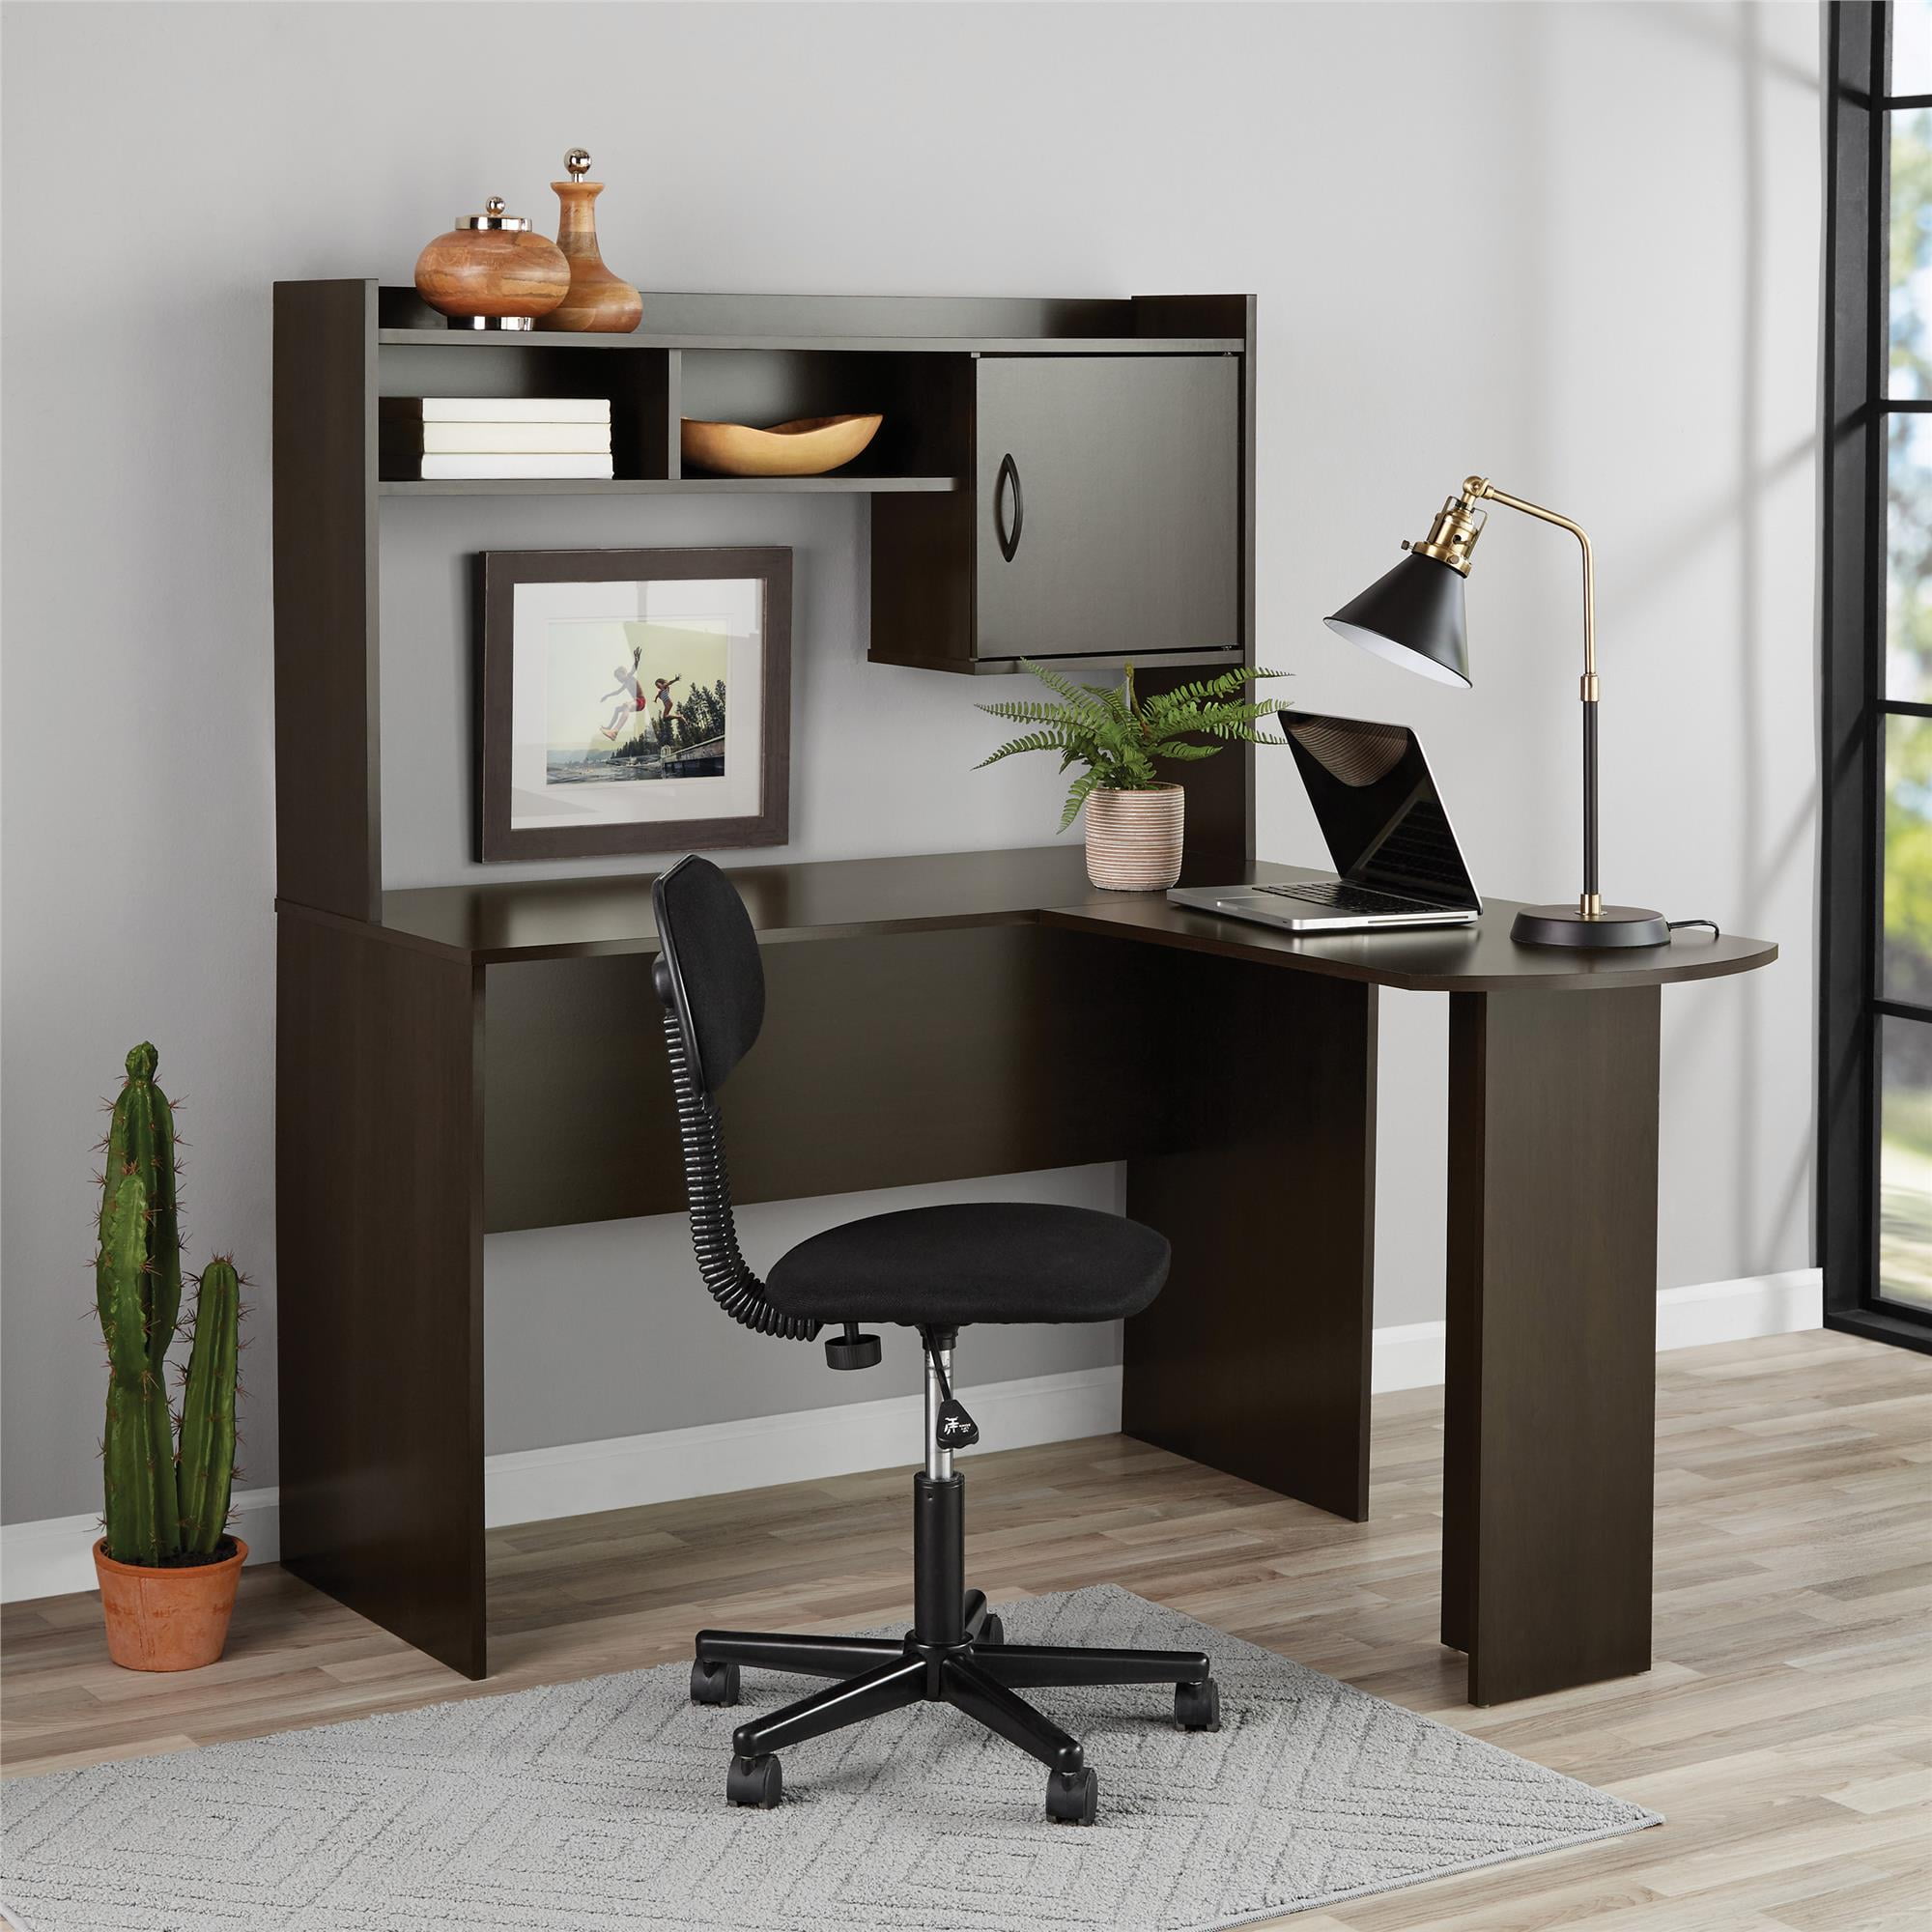 Mainstays 9871303WCOM L-Shaped Desk with Hutch Espresso for sale online 